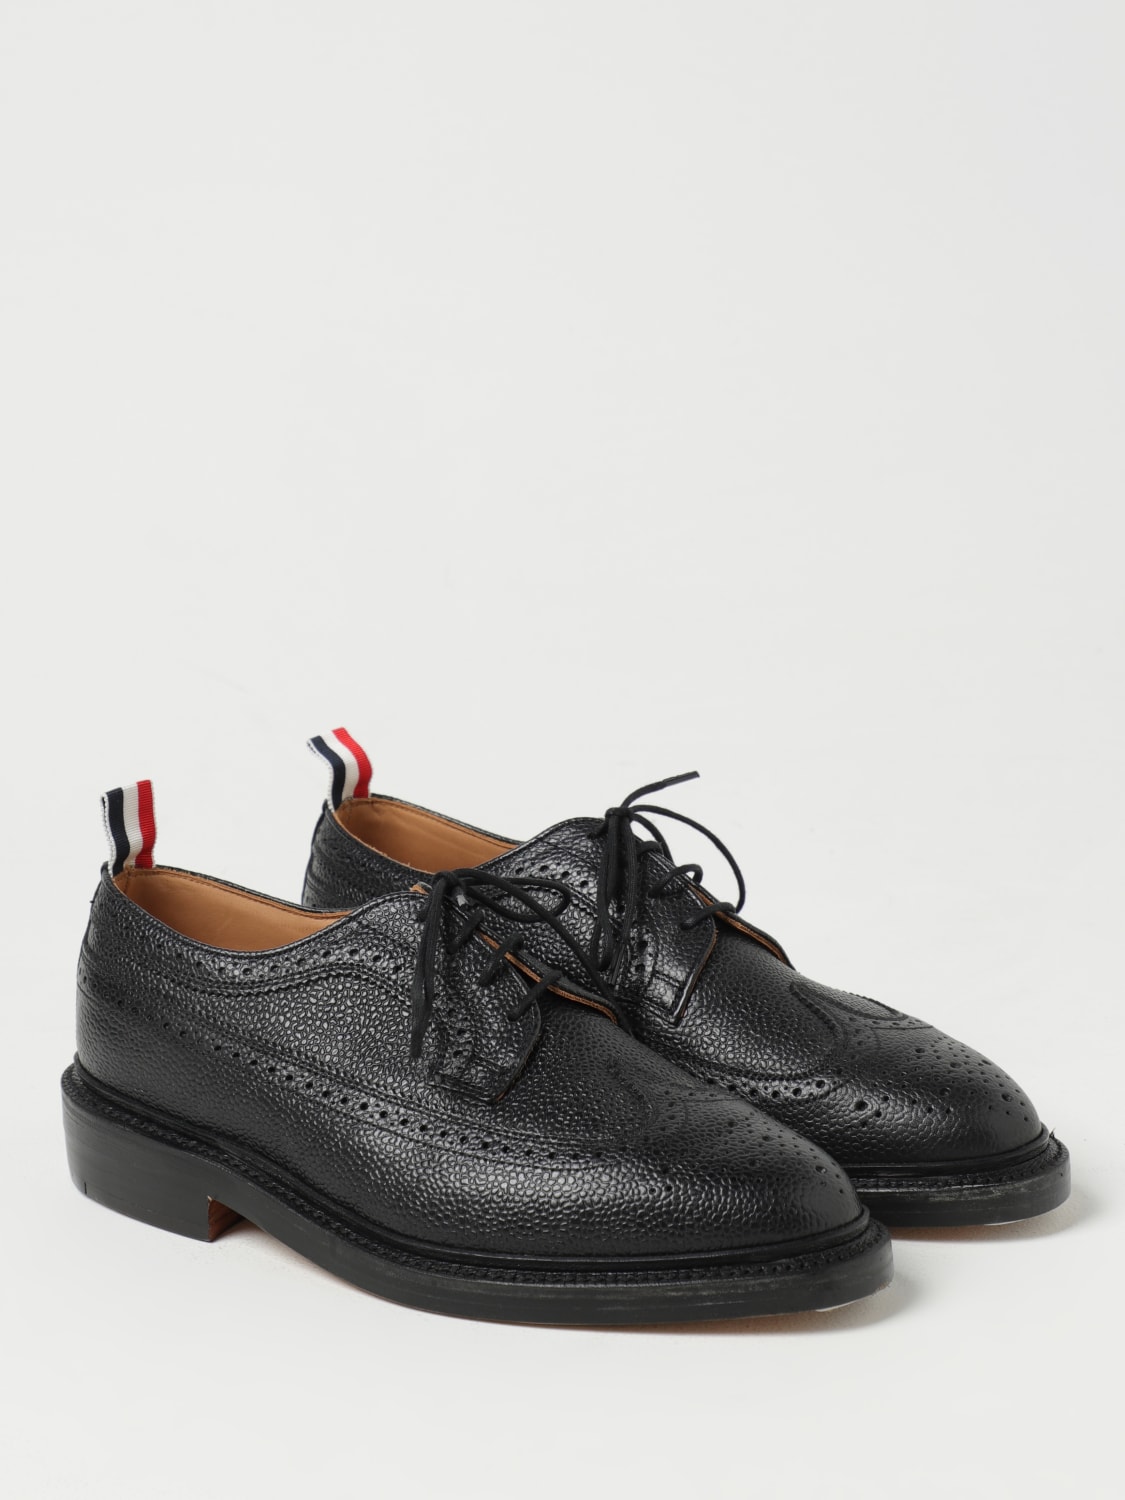 Thom Browne derby shoes in grained leather